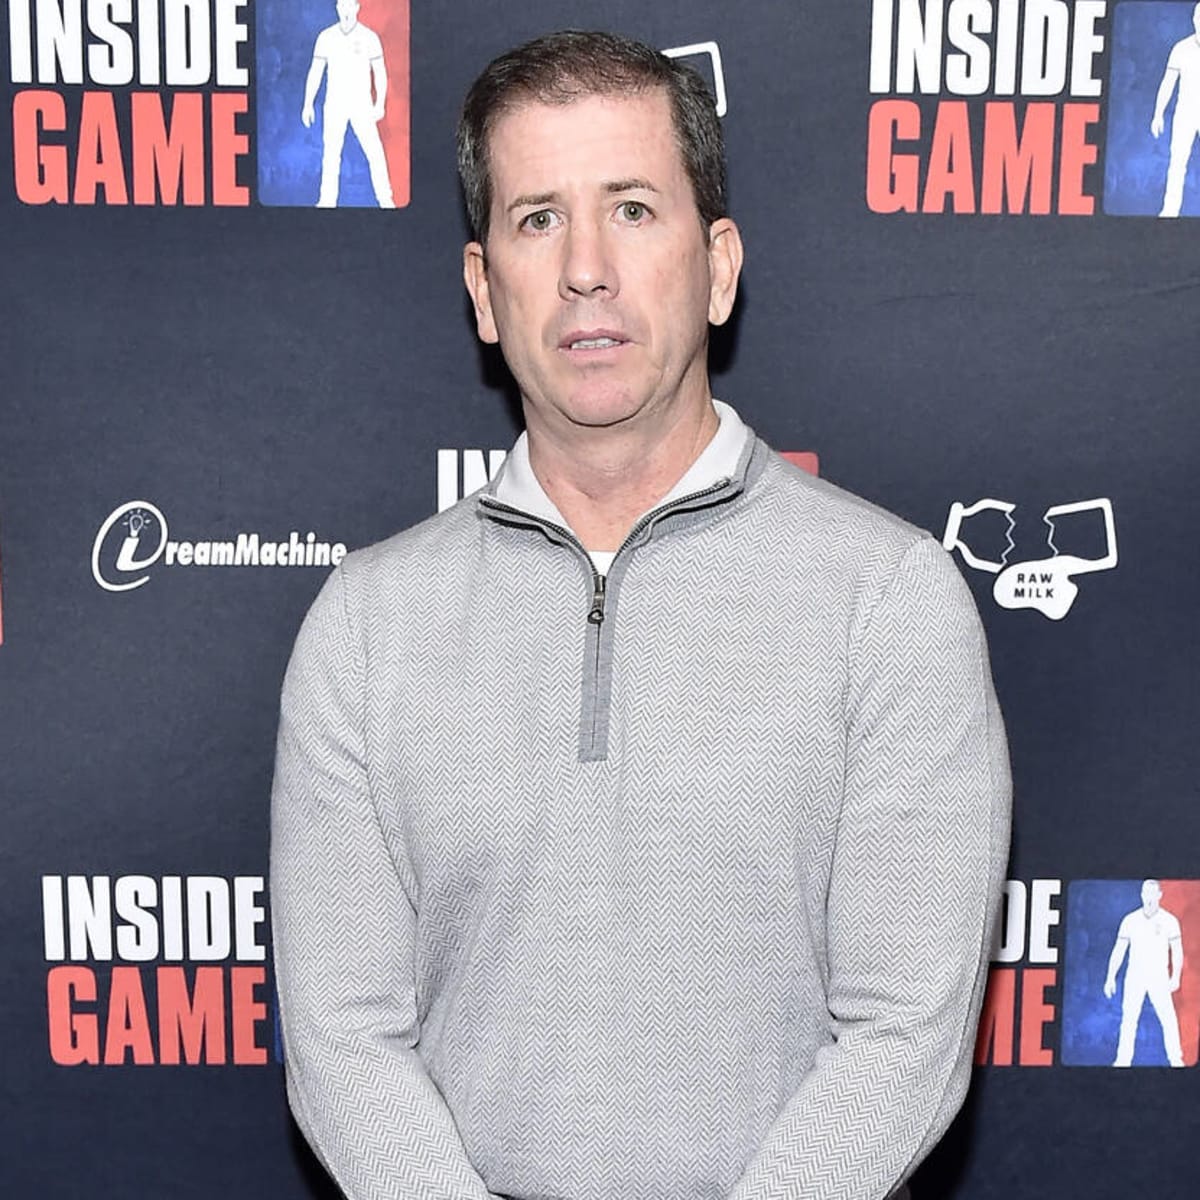 How former ref Tim Donaghy conspired to fix NBA games - ESPN